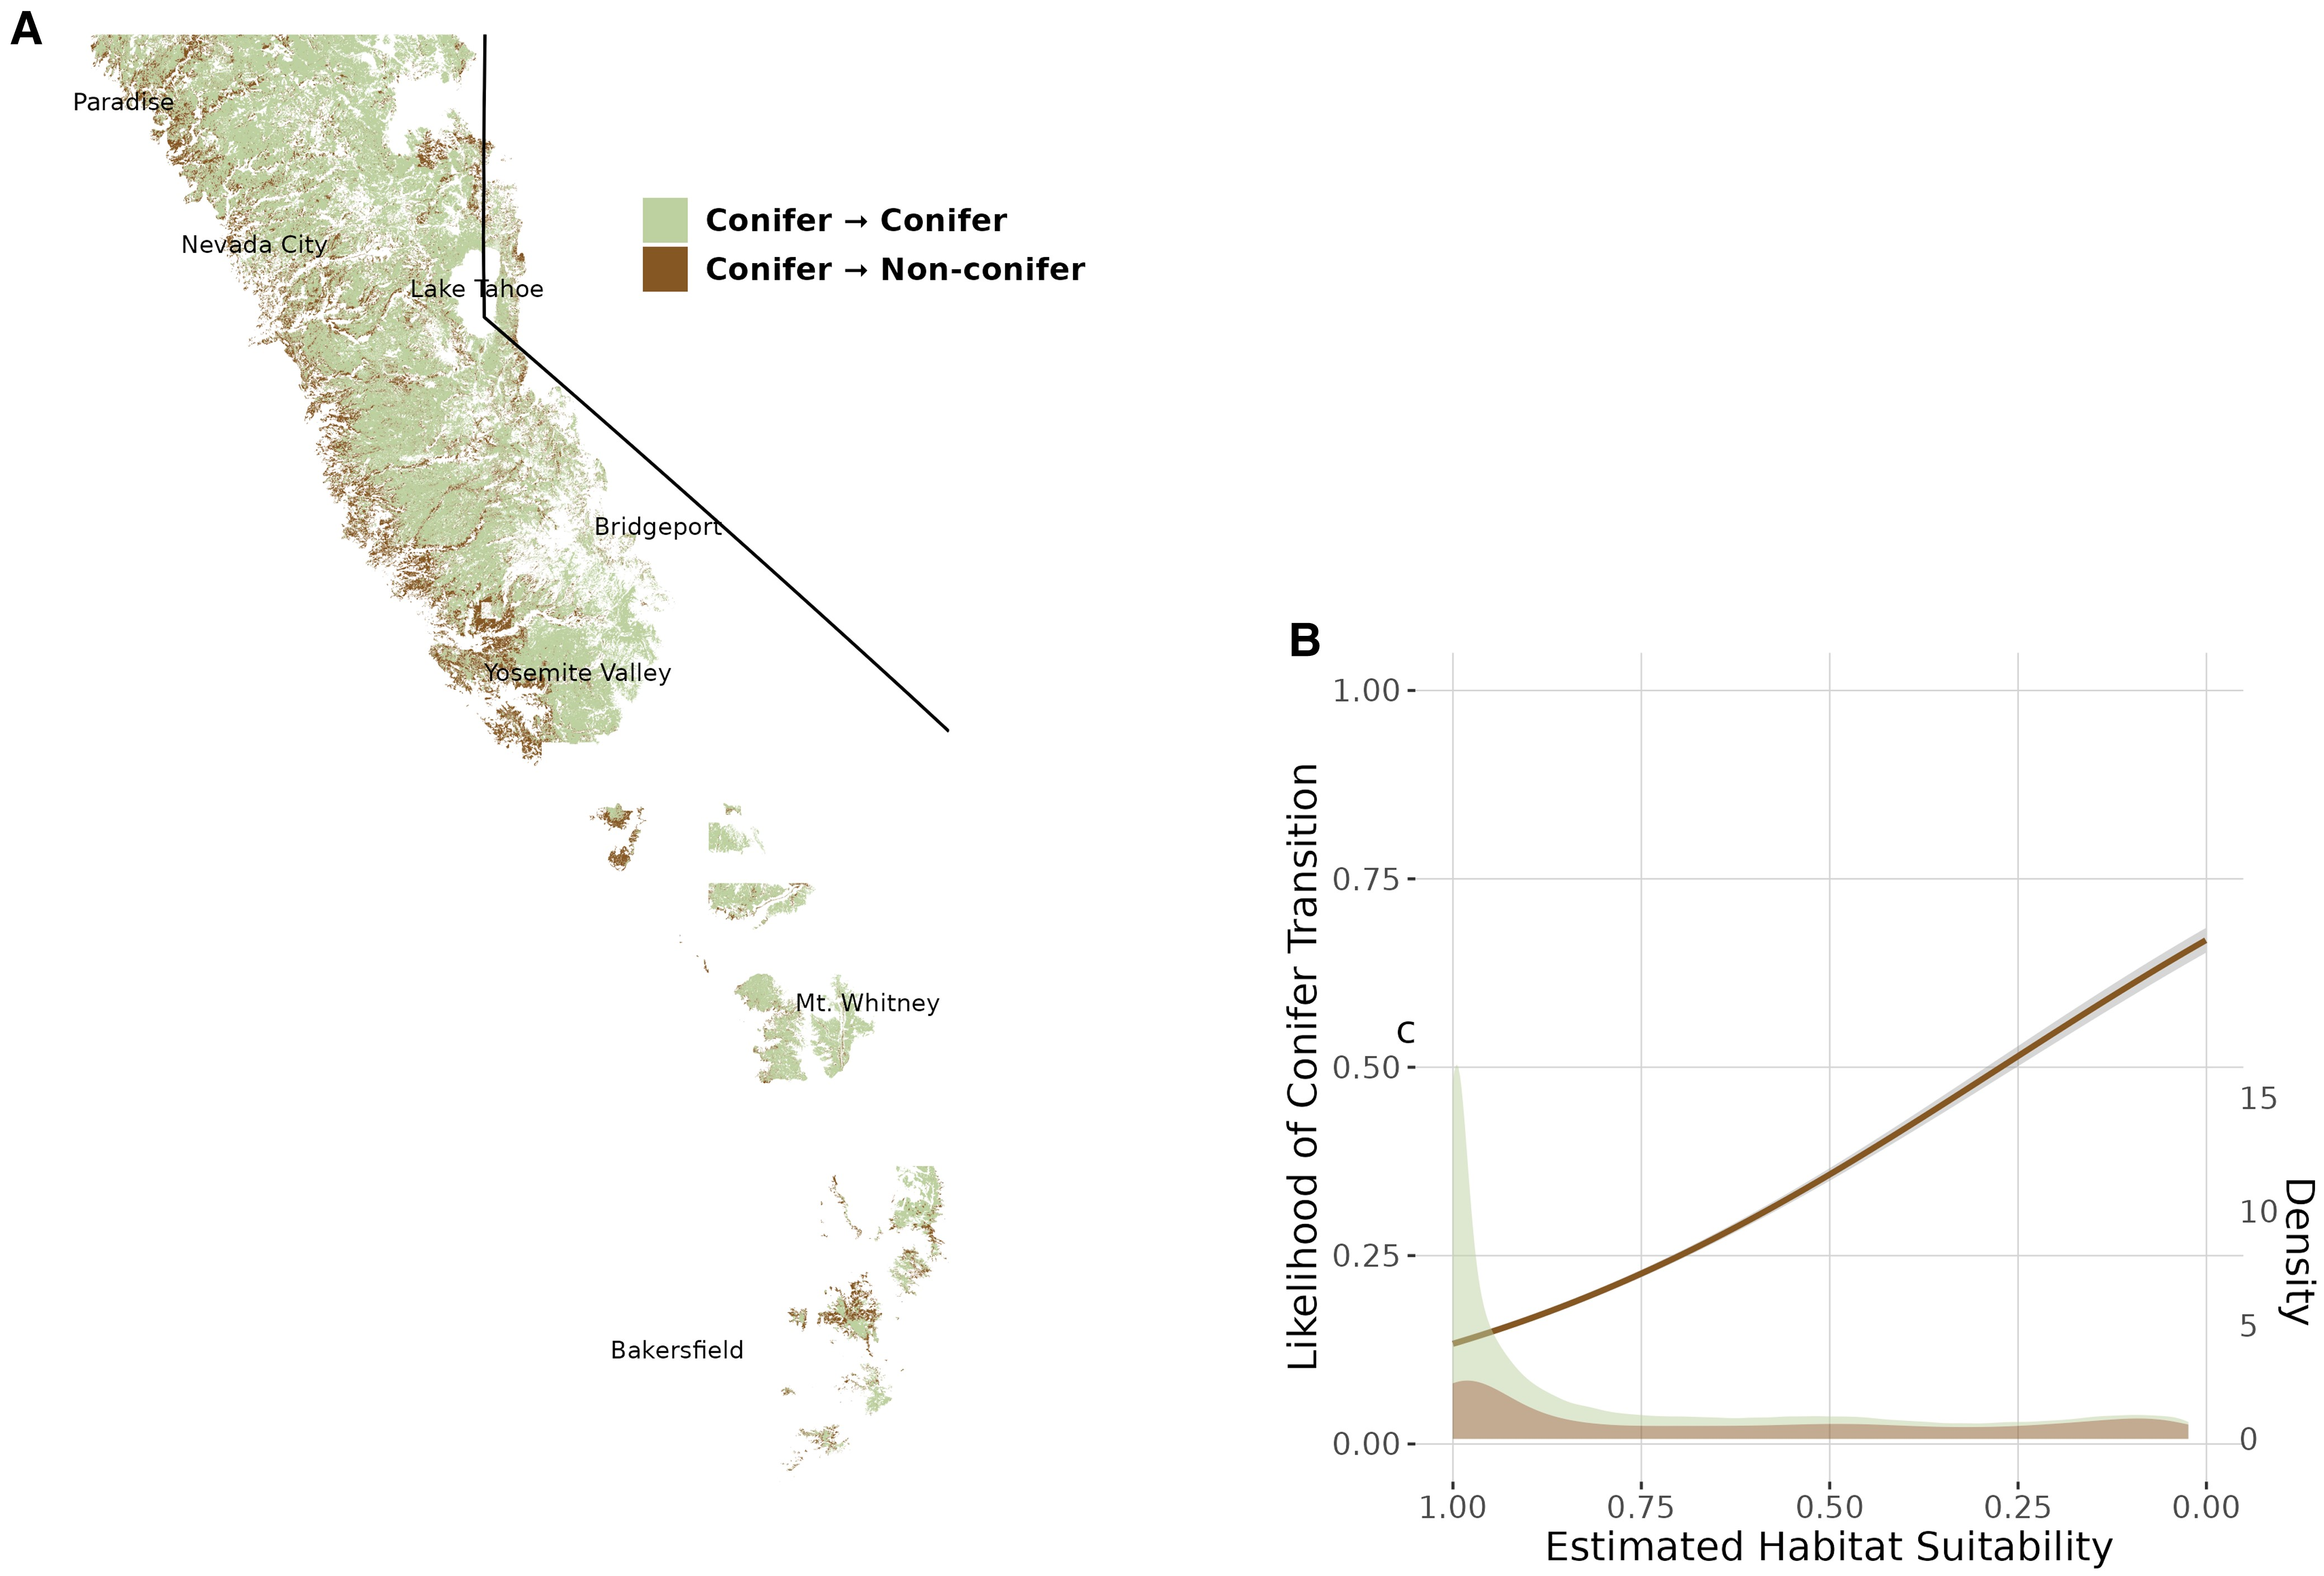 Habitat suitability of observed vegetation transitions between 1930s and 2010s. Areas that transitioned from conifer-dominated to angiosperm-dominated vegetation from 1930s to present tended to have lower modern conifer habitat suitability (p < 2 × 10−16). (a) All areas in the Sierra Nevada with complete vegetation data from the 1930s (Wieslander) and 2010s (EVeg) area shown. Most transitions from conifer-dominant vegetation are along the low-elevation edges of the historic conifer distribution. (b) The fitted logistic regression line indicates that the odds of conifer forests persisting decreased by 9.2% (95% CI = [0.092, 0.093]) for every 0.1 decrease in predicted habitat suitability. Probability density estimates for the areas of either transition or persistence are included. Graphic: Hill, et al., 2023 / PNAS Nexus